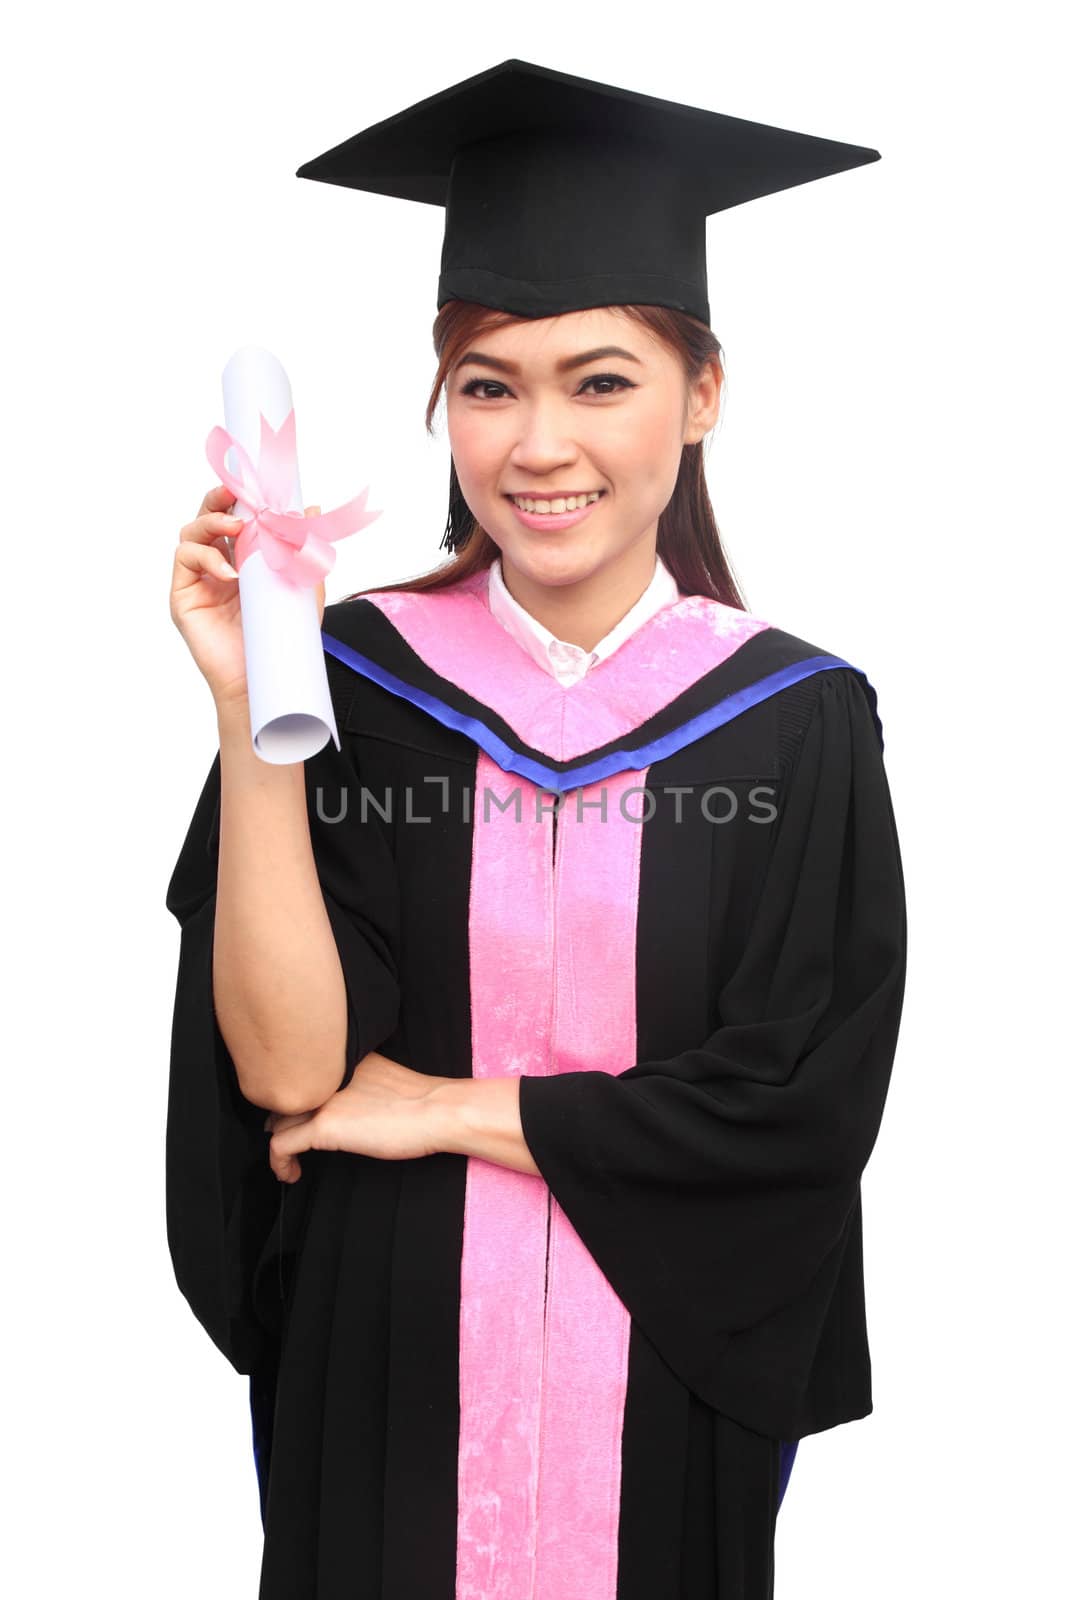 young woman with graduation cap and gown with arm raised holding diploma